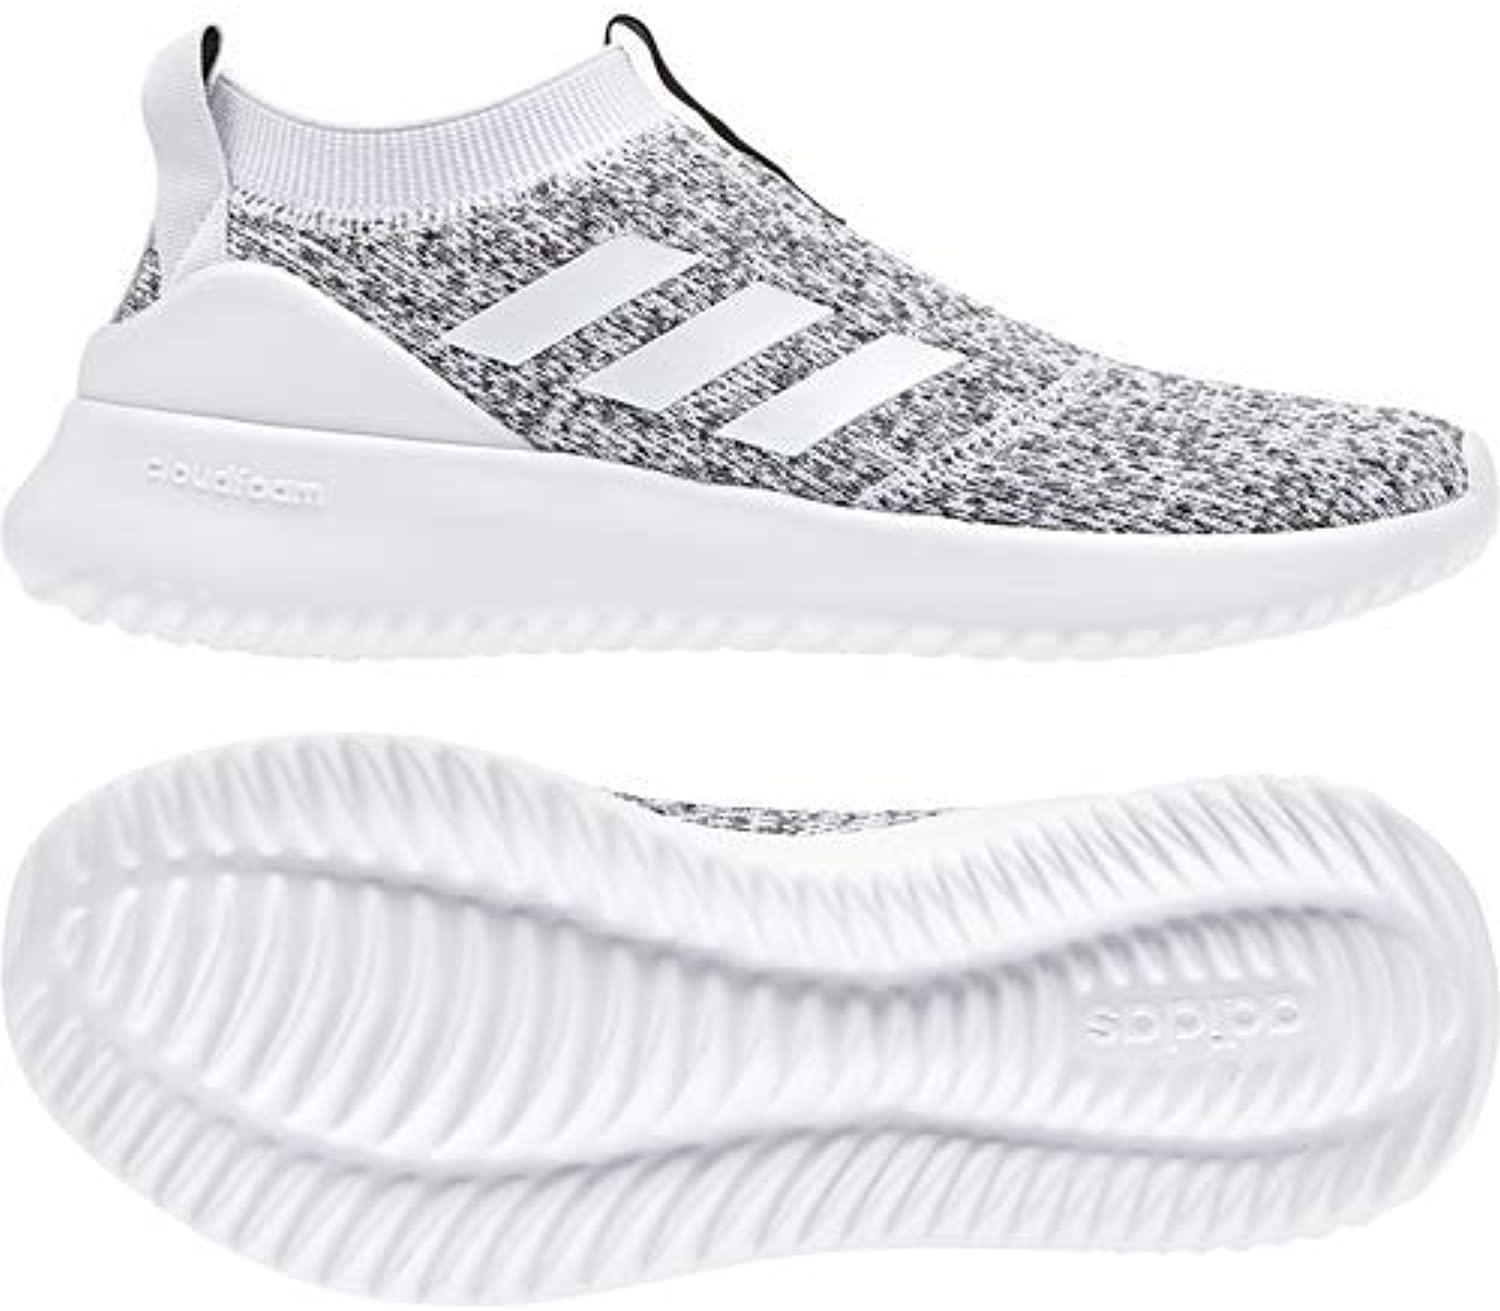 adidas Ultimafusion Running Shoe in White | Lyst